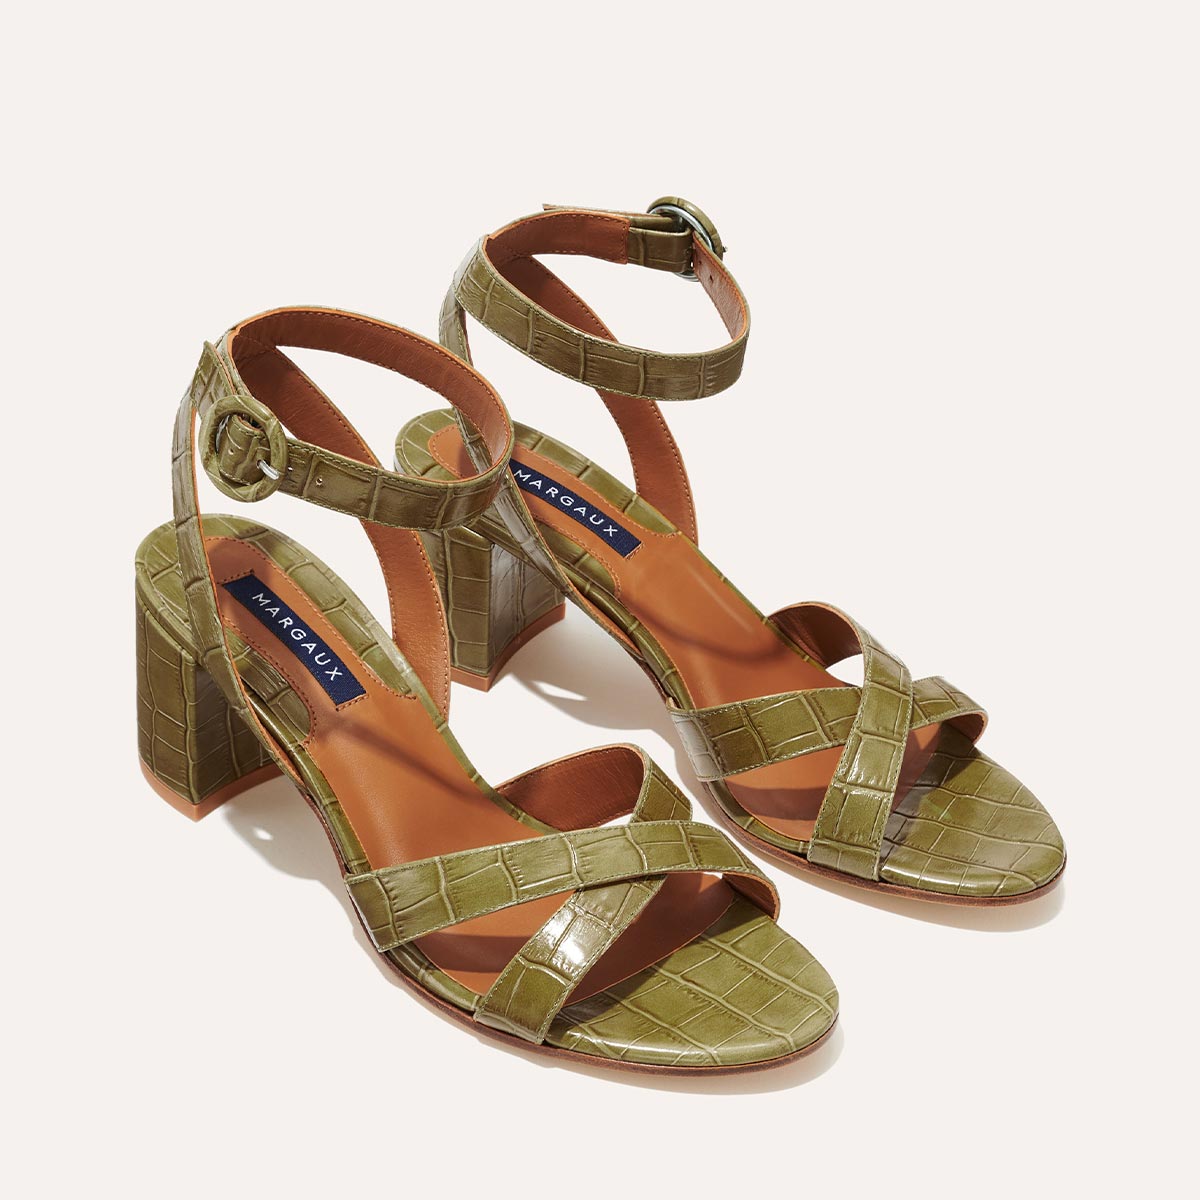 Margaux's classic City Sandal in olive green croc embossed leather with comfortable straps and a walkable block heel